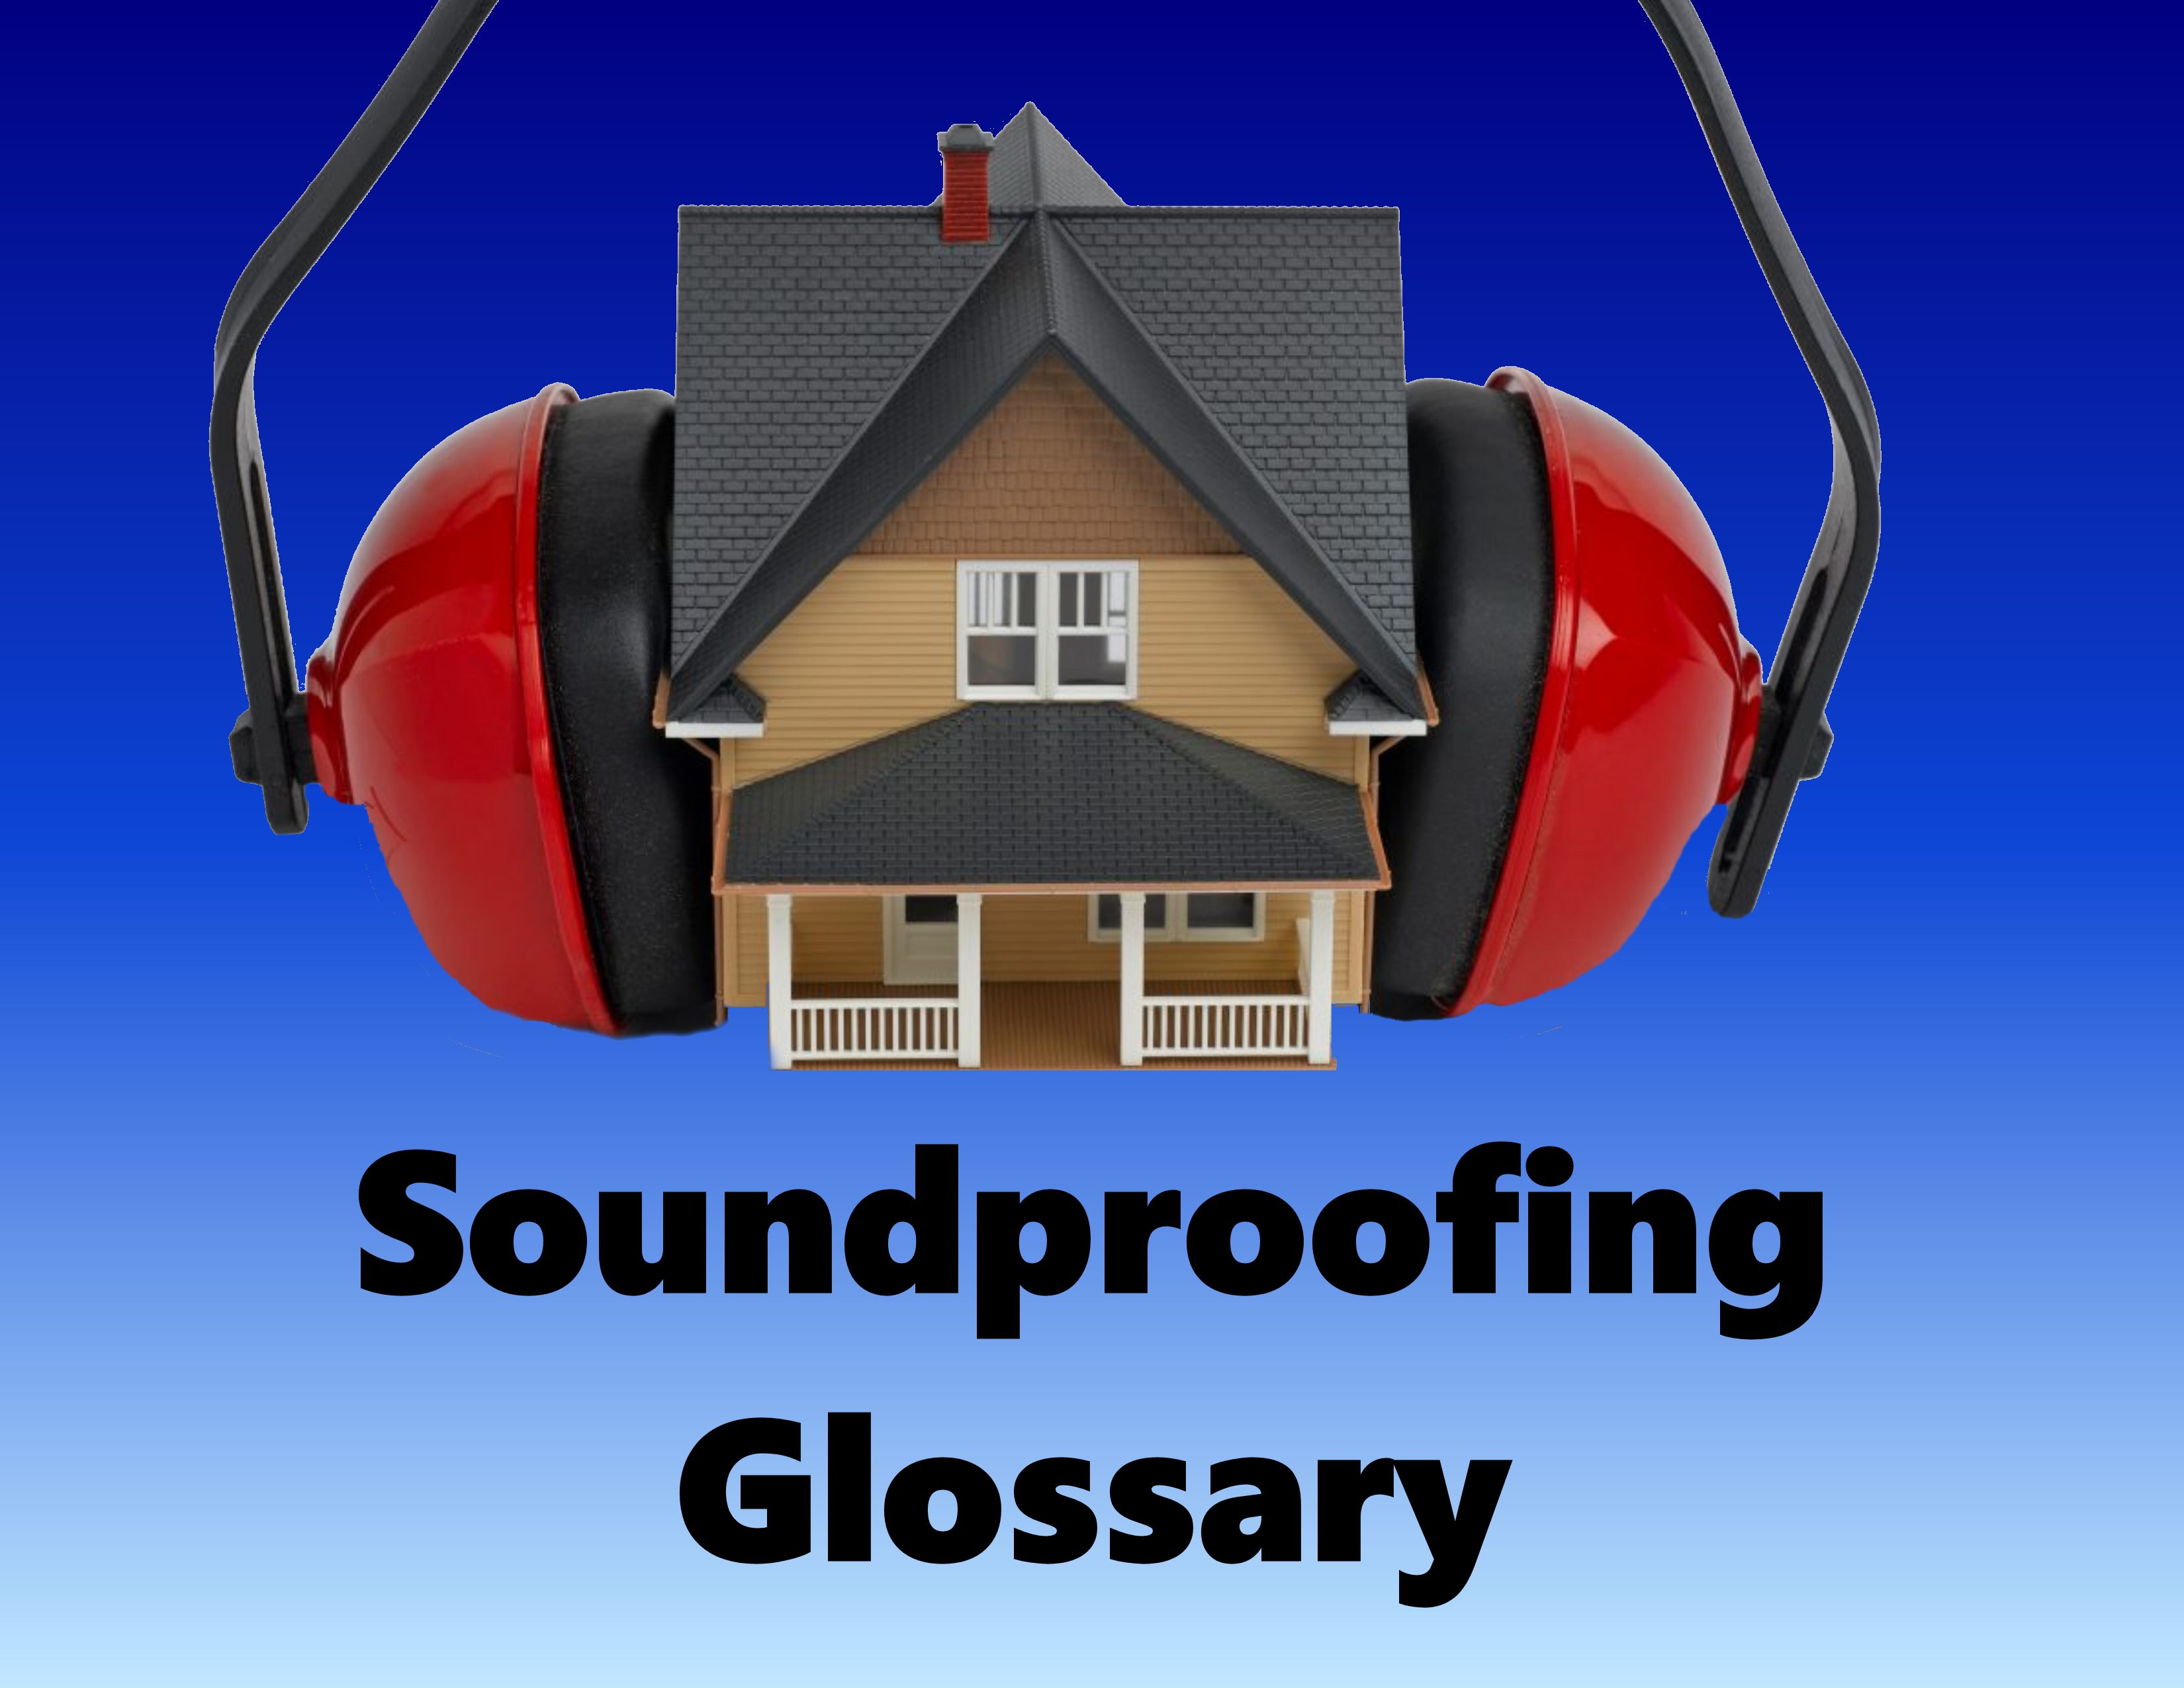 What is Flanking Sound? - Hush City Soundproofing  Calgary's Top  Soundproofing Experts, Commercial and Residential Applications